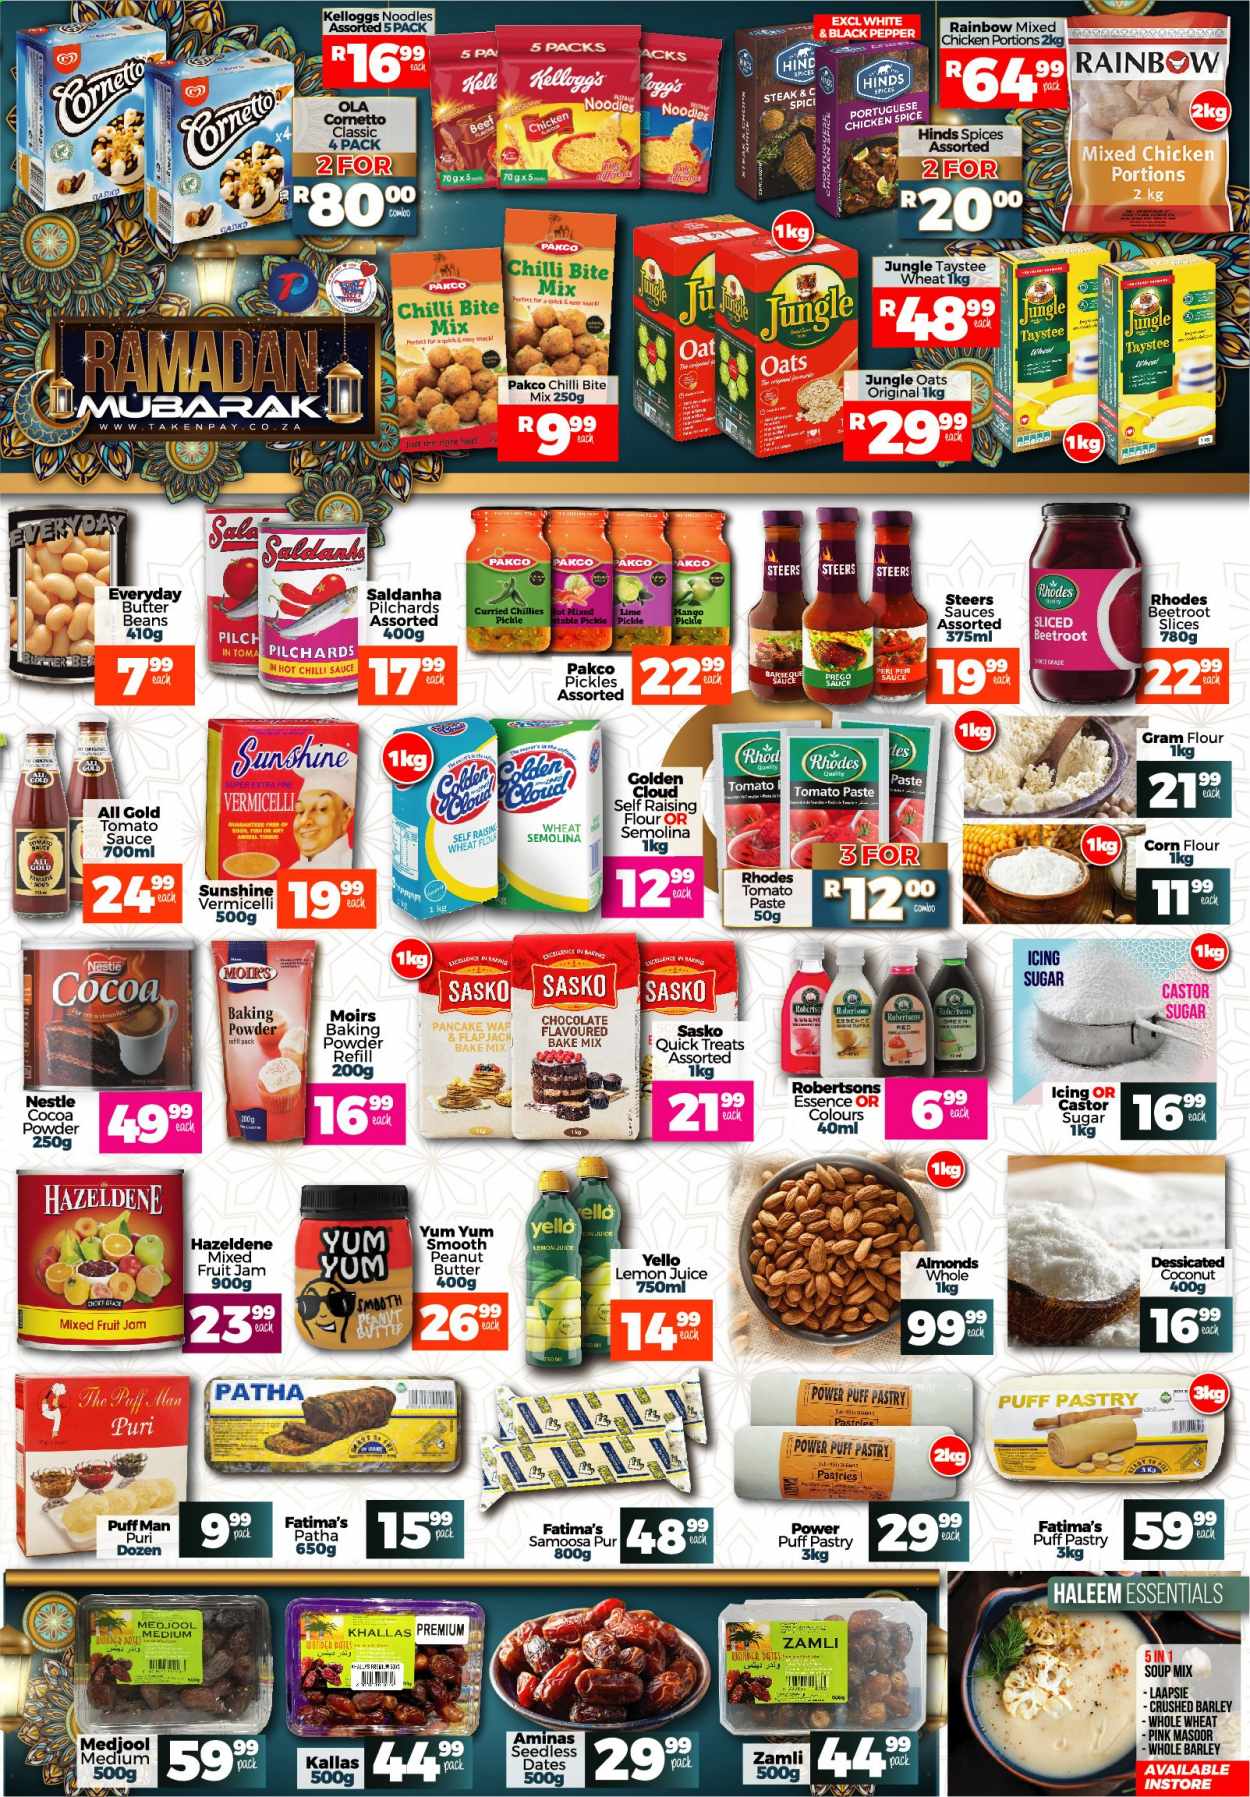 Take n Pay specials - 04.13.2021 - 04.18.2021. 